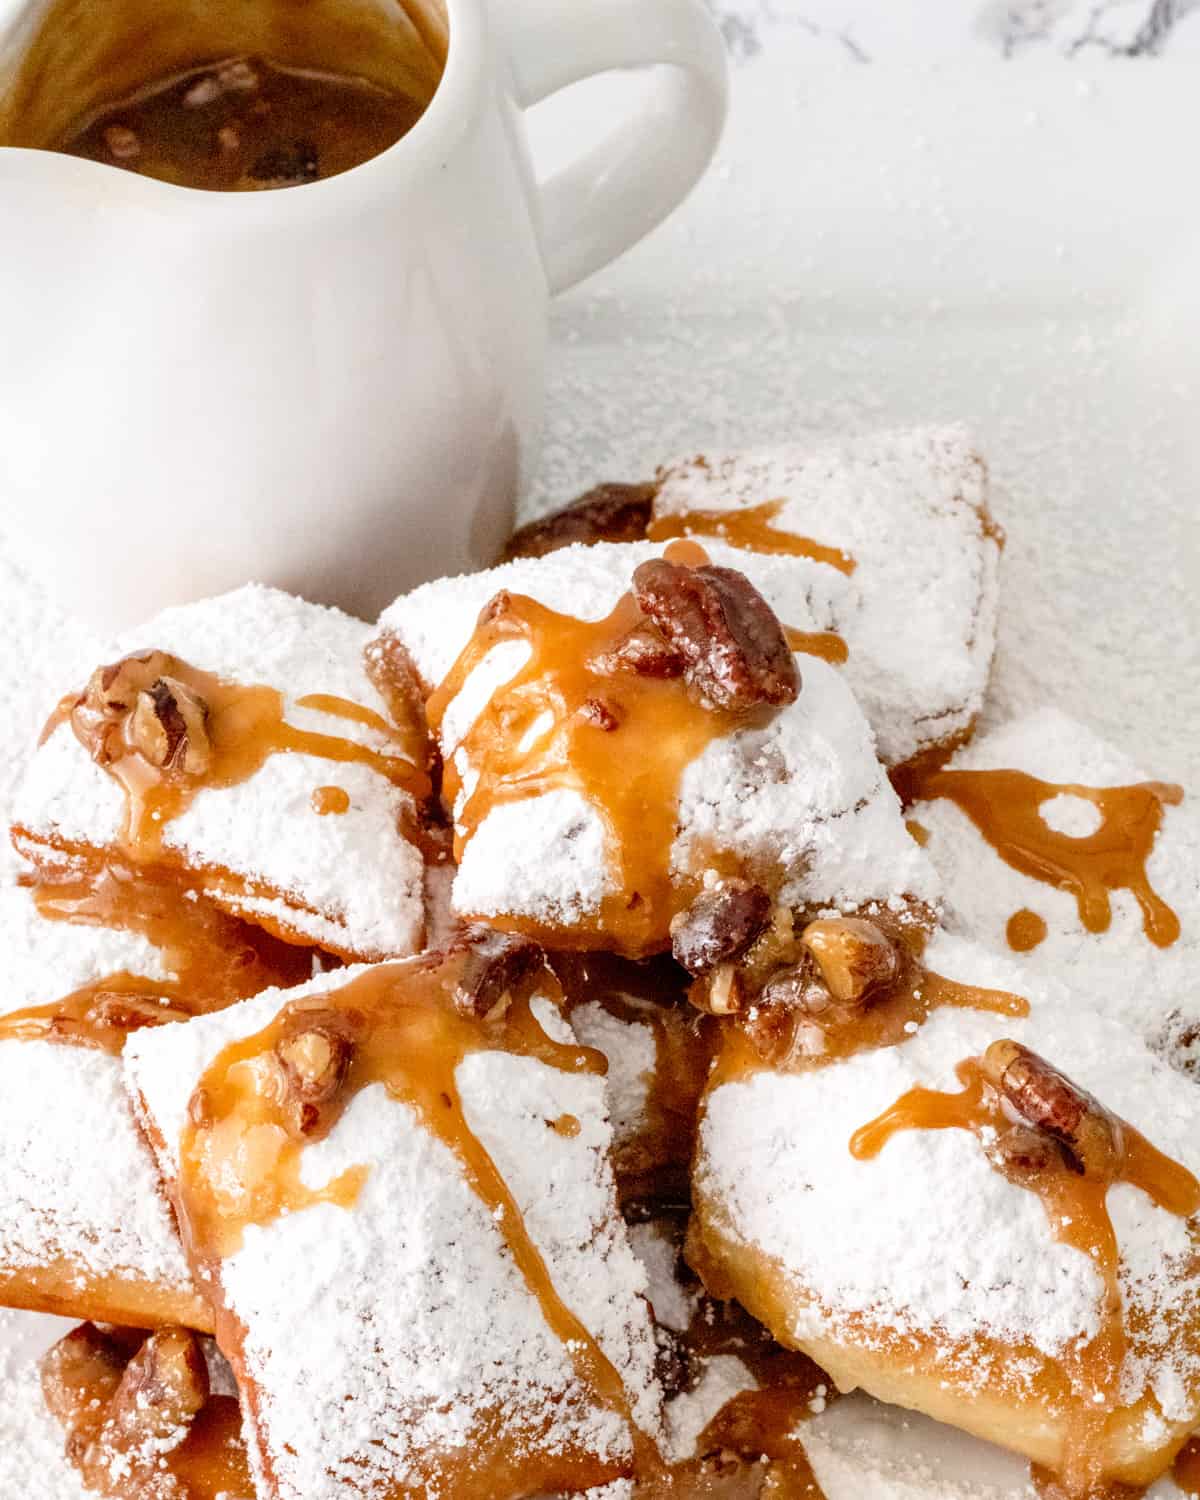 Plate of beignets covered in powdered sugar with pecan praline sauce drizzled over. Small pitcher of praline sauce behind.